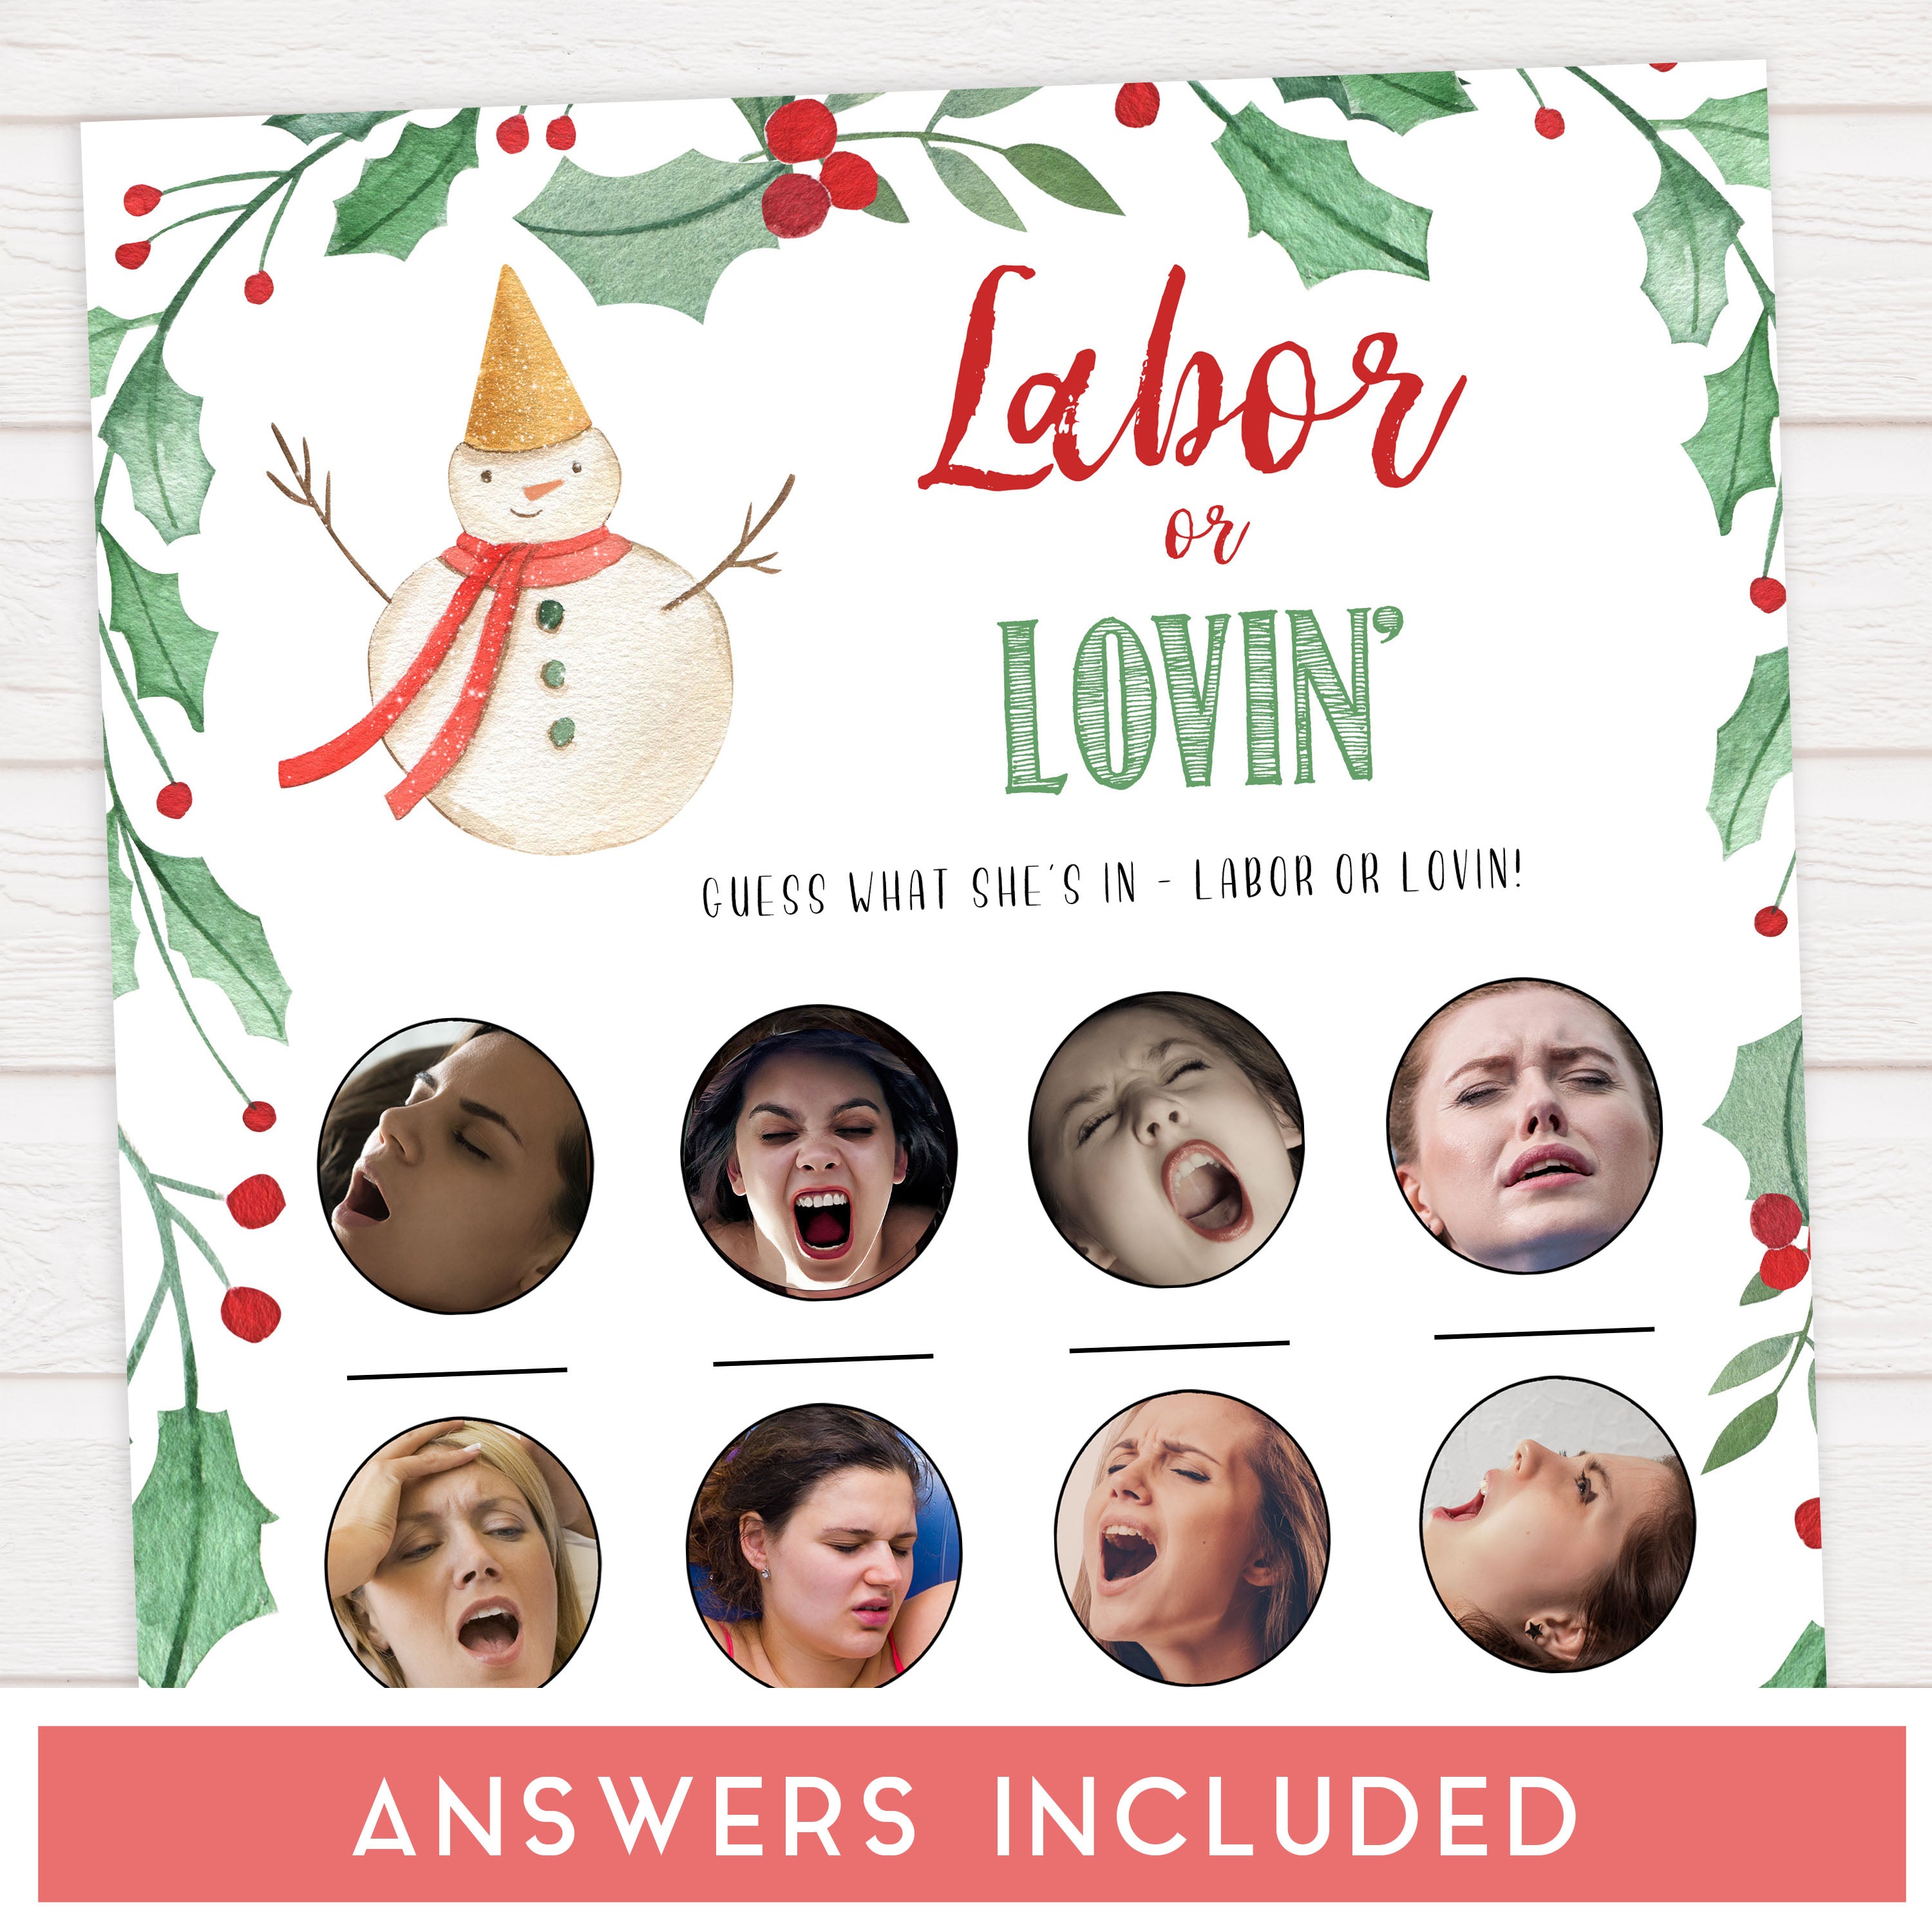 Christmas baby shower games, labor or lovin, labor or porn game, festive baby shower games, best baby shower games, top 10 baby games, baby shower ideas, baby shower games